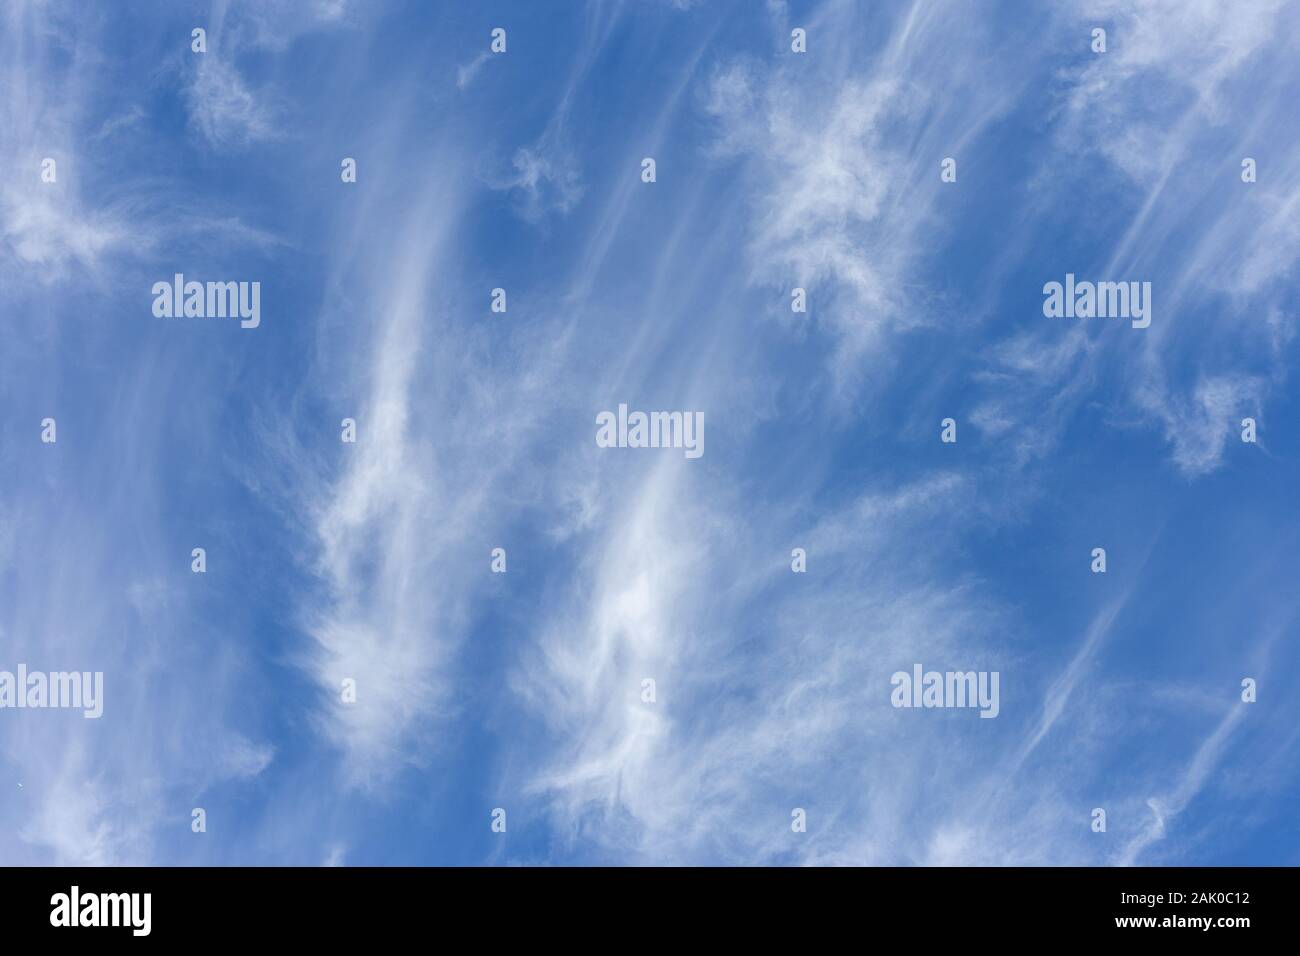 Blurred white clouds on the sky background. Stock Photo